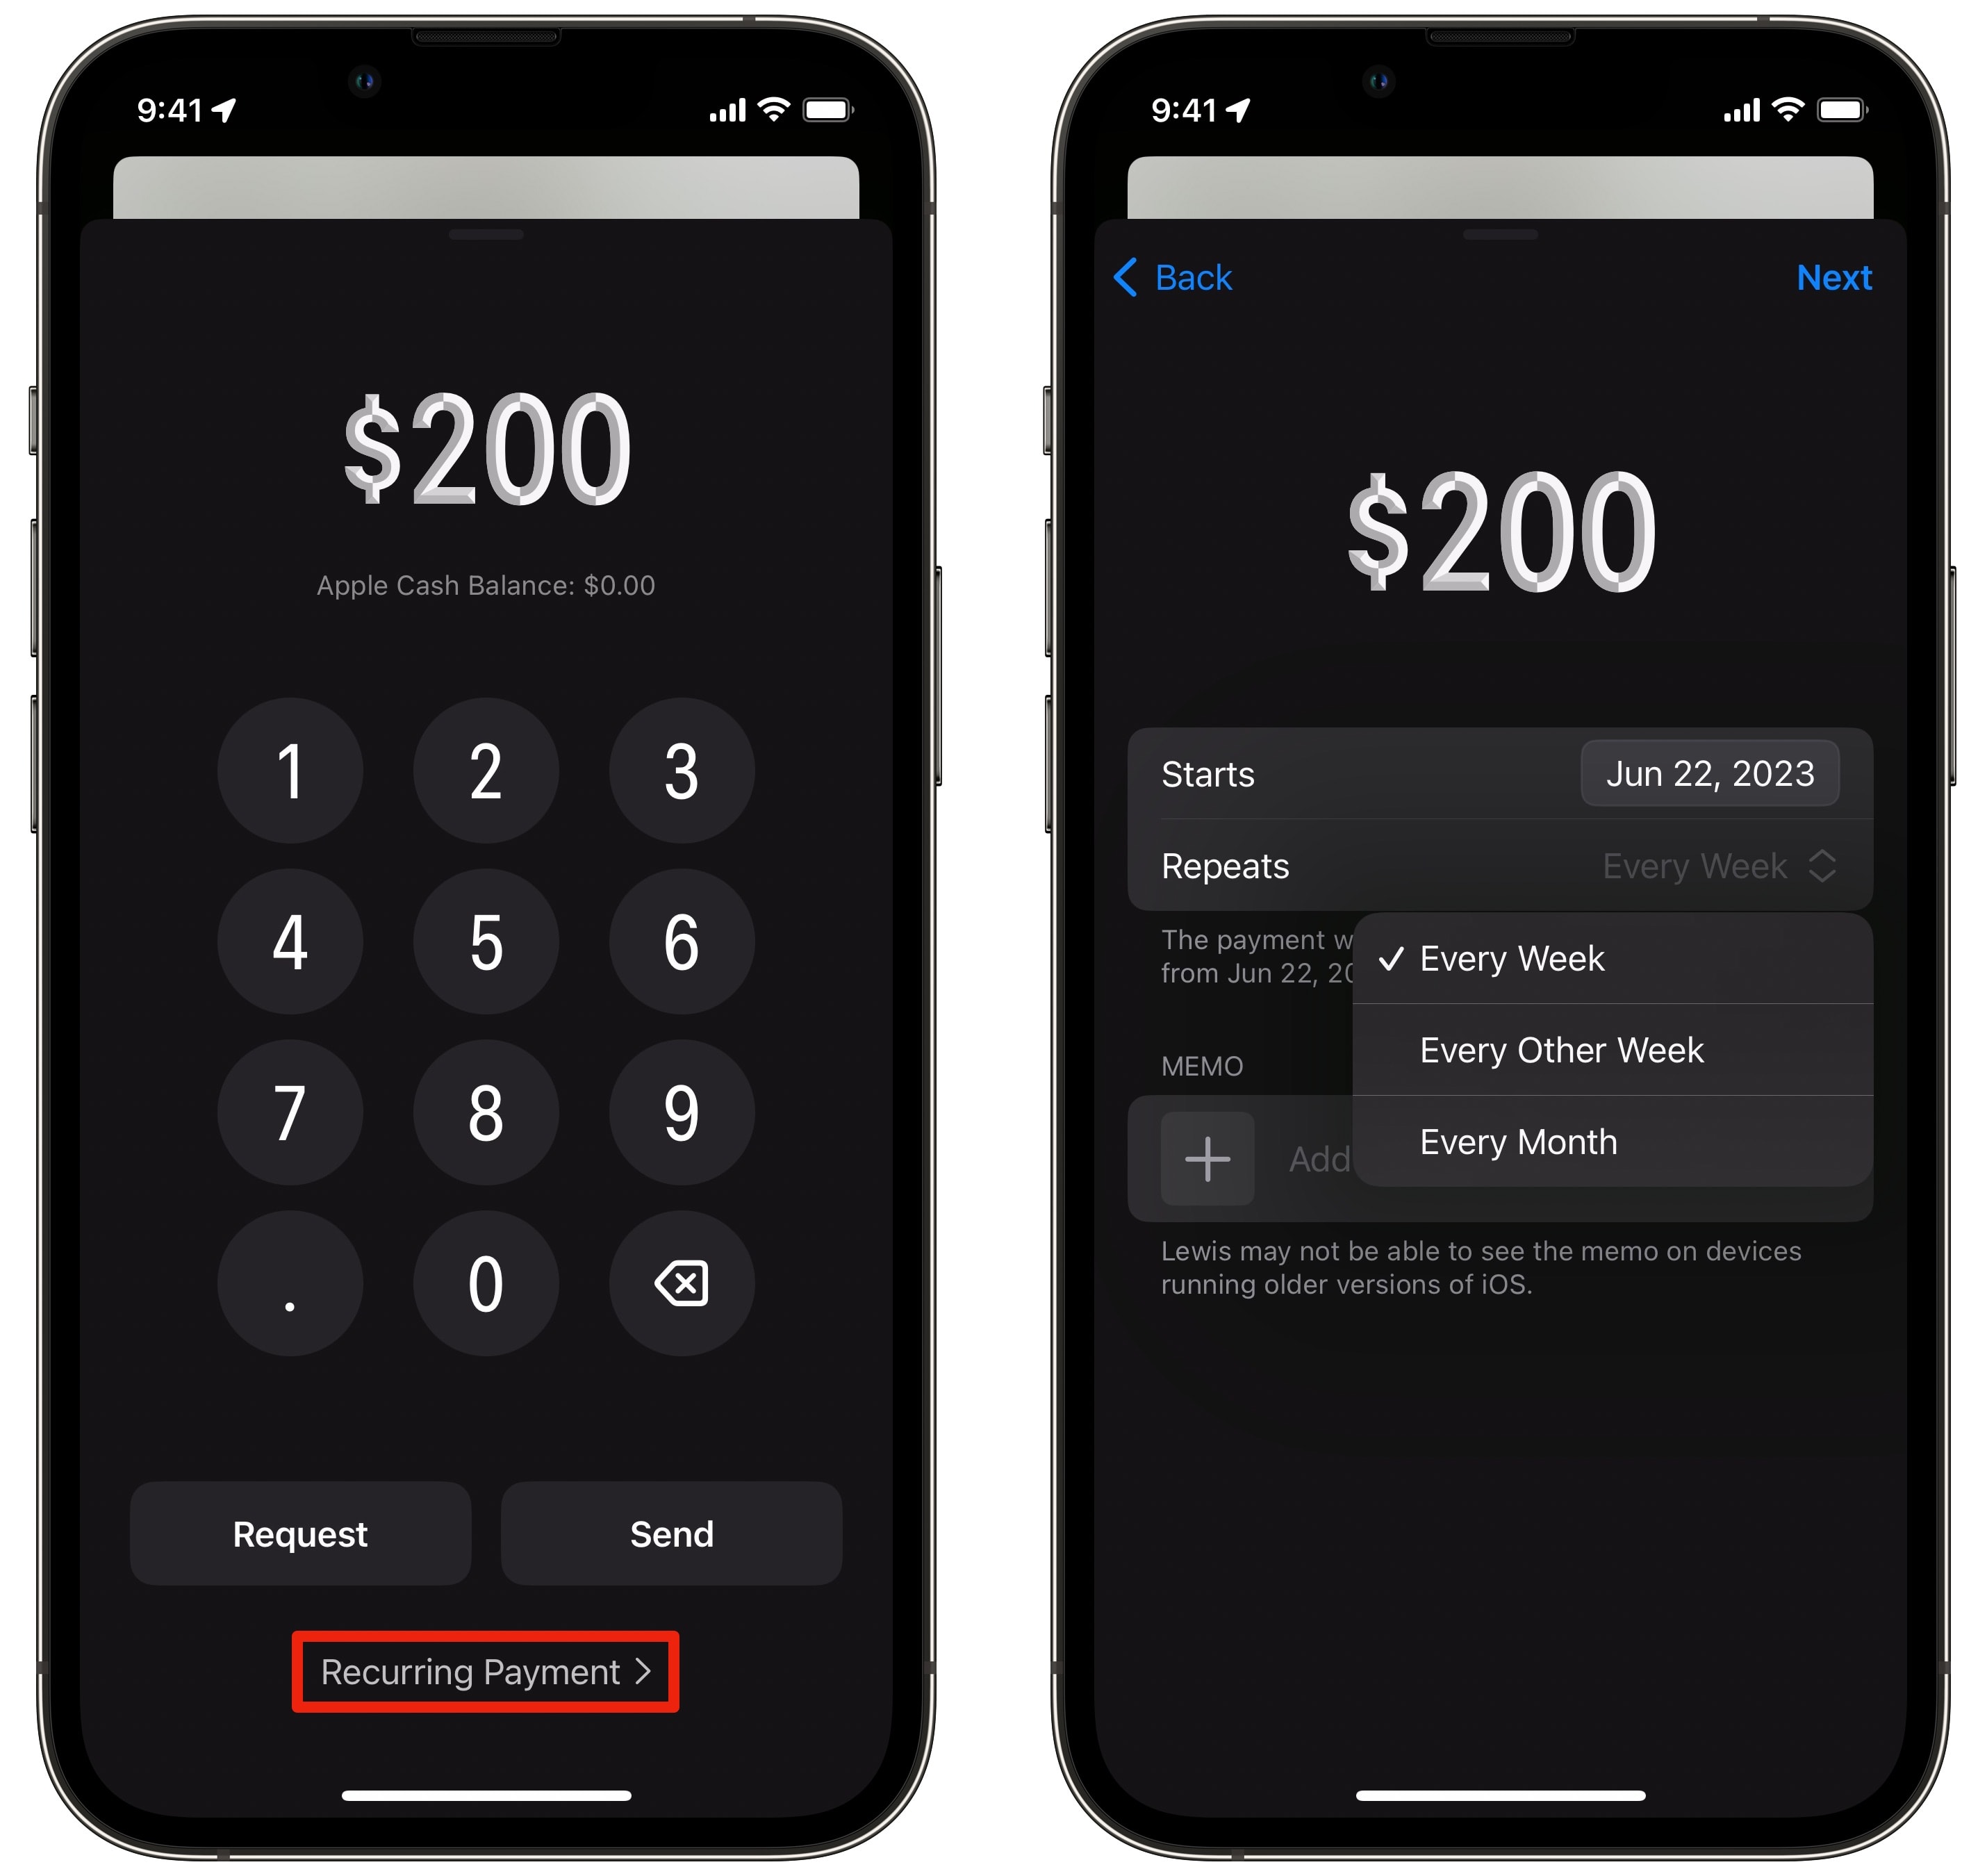 Set up recurring Apple Cash Payments